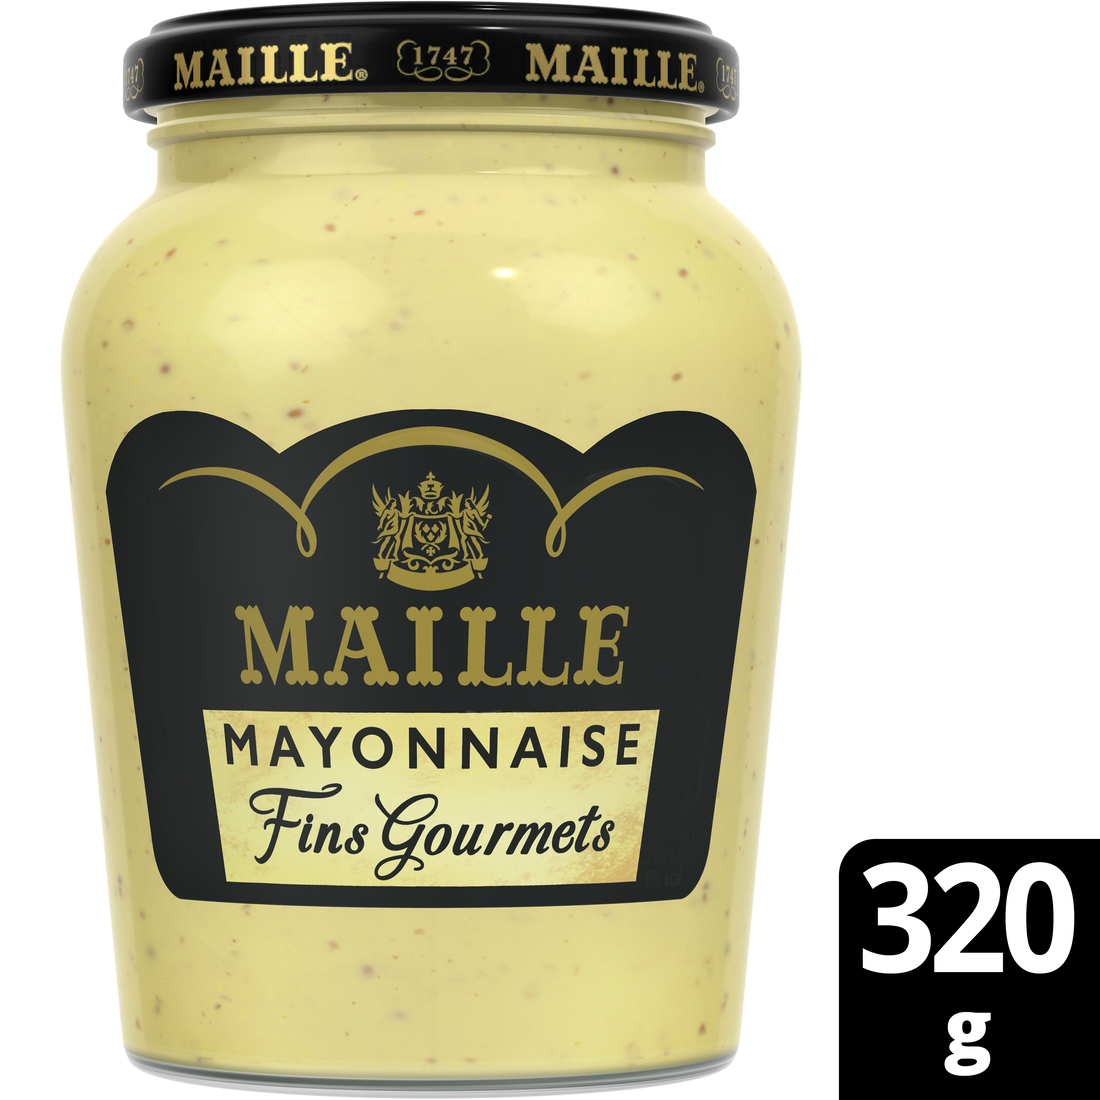 MAILLE Mayonnaise fins gourmets 13/04/24